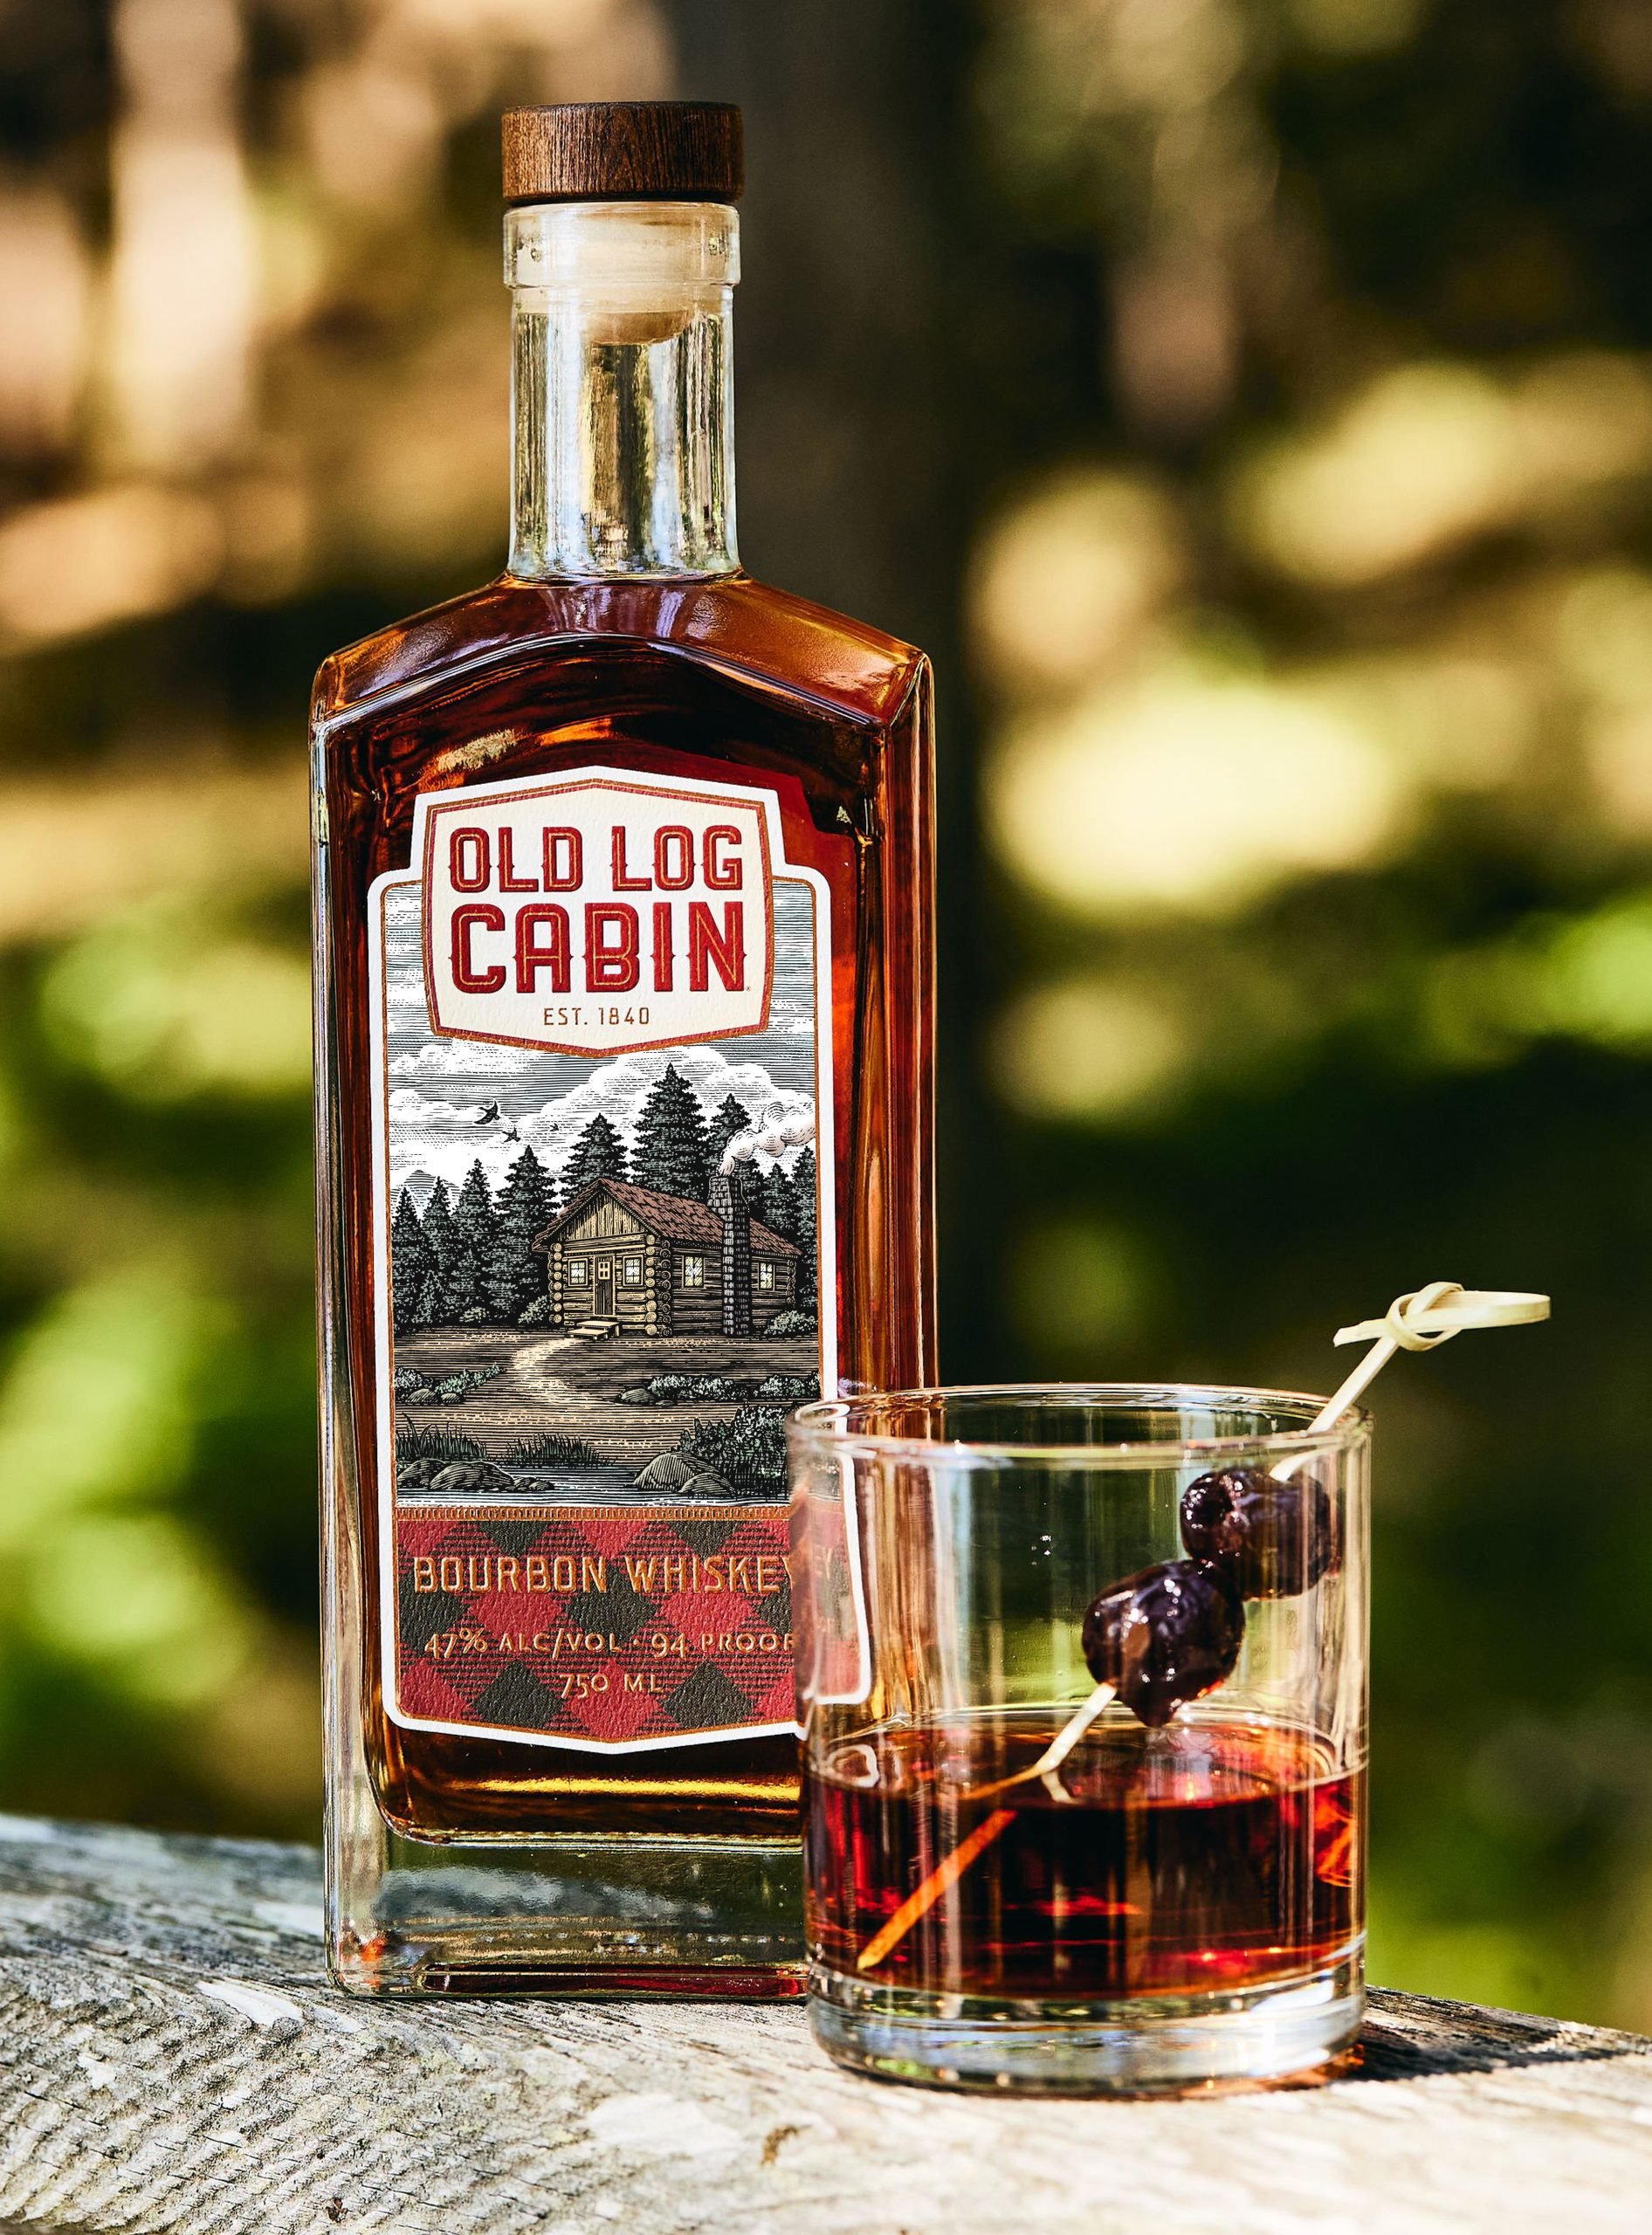 Old Log Cabin Releases a Charming Rustic Bottle Perfect for a Long Weekend in the Woods